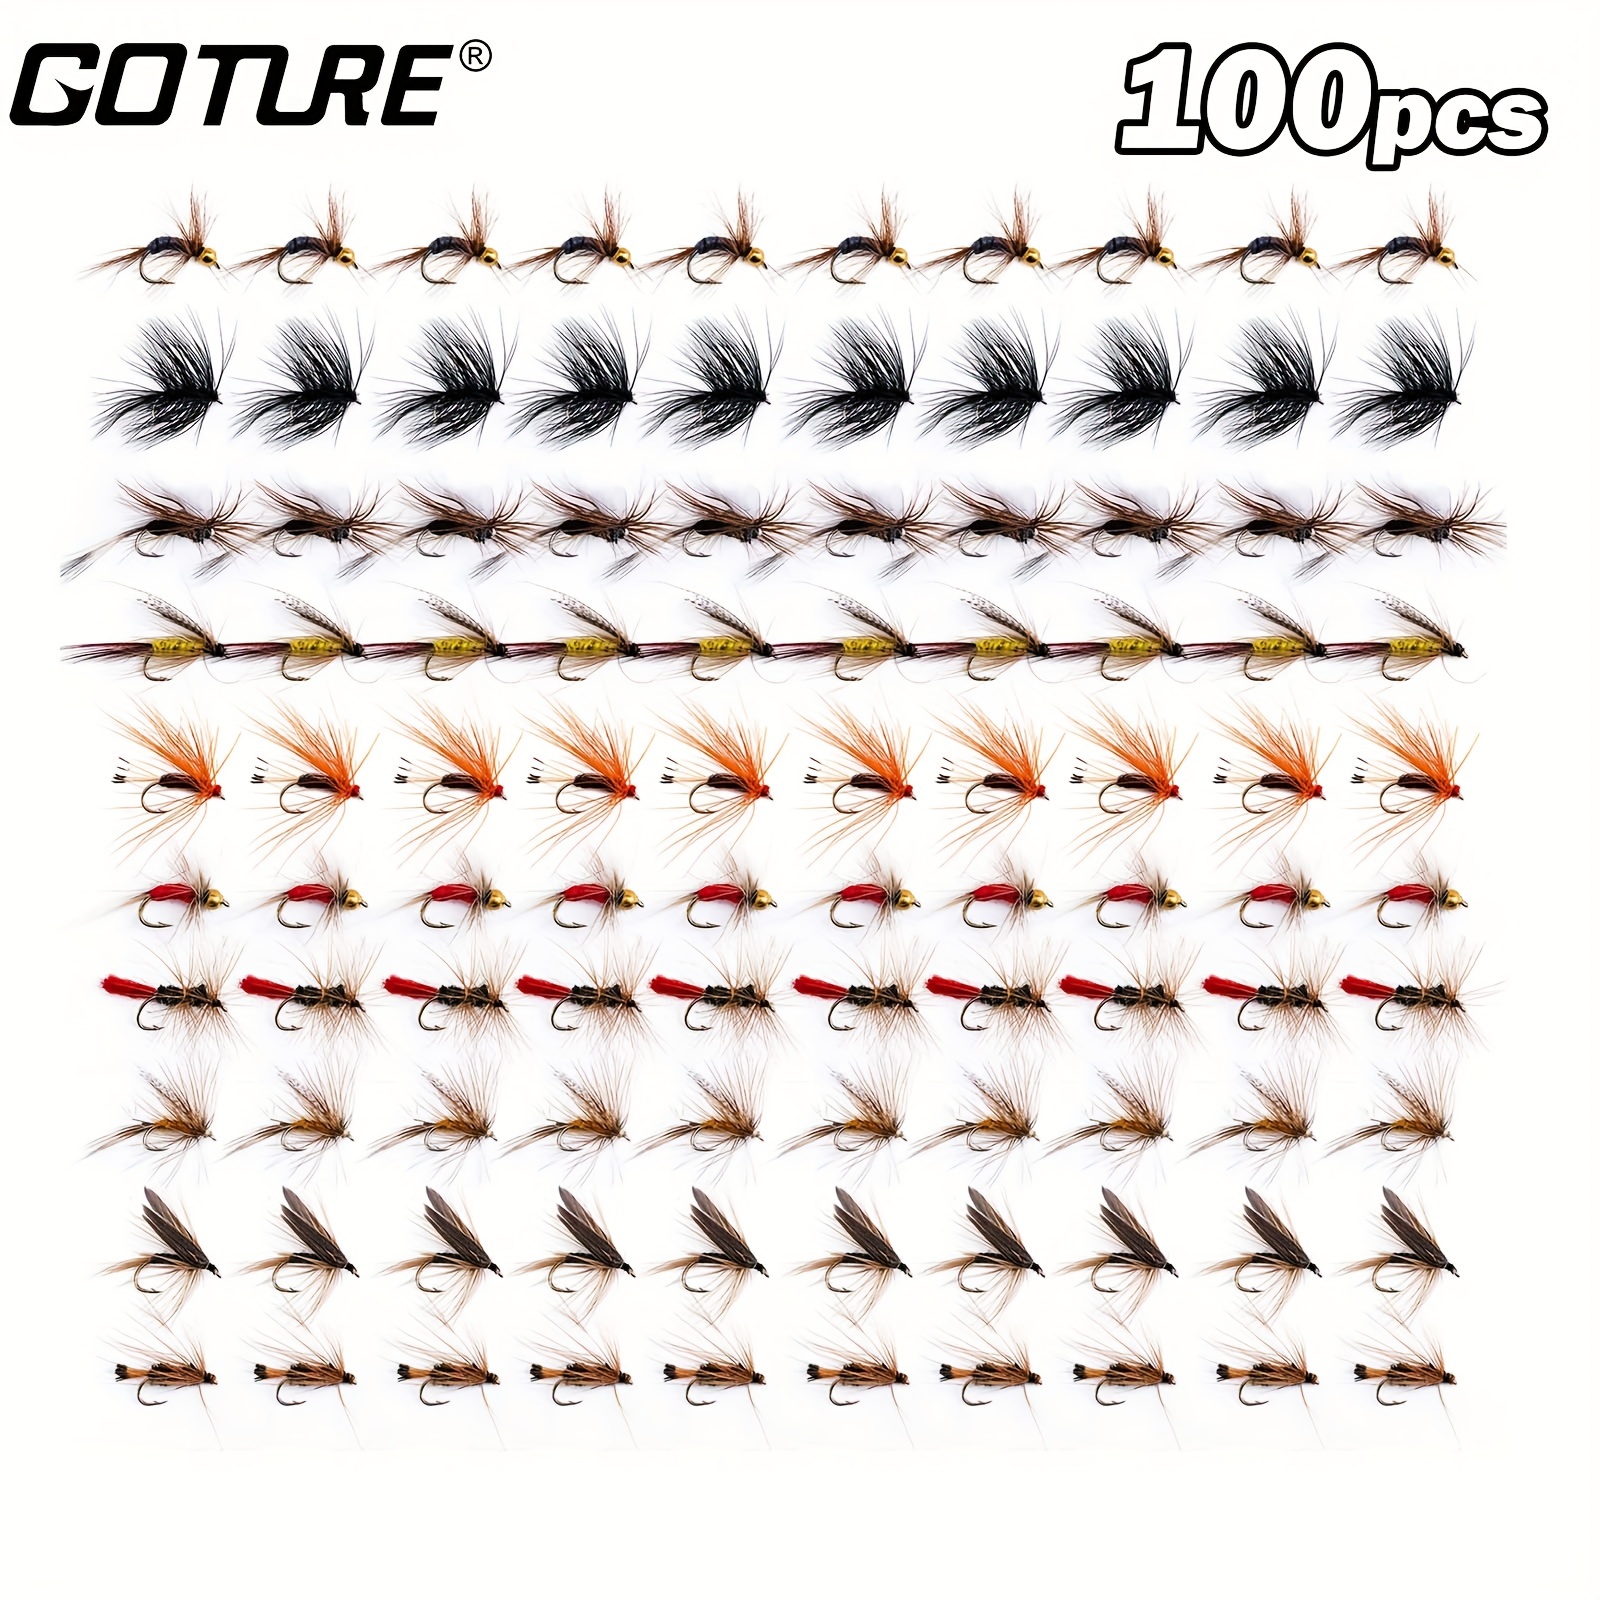 

100pcs Fly Fishing Flies, Dry Flies Wet Flies Streamers Nymphs Flies, Colorful And Lifelike Flies, Fly Fishing For Bass Trout Salmon